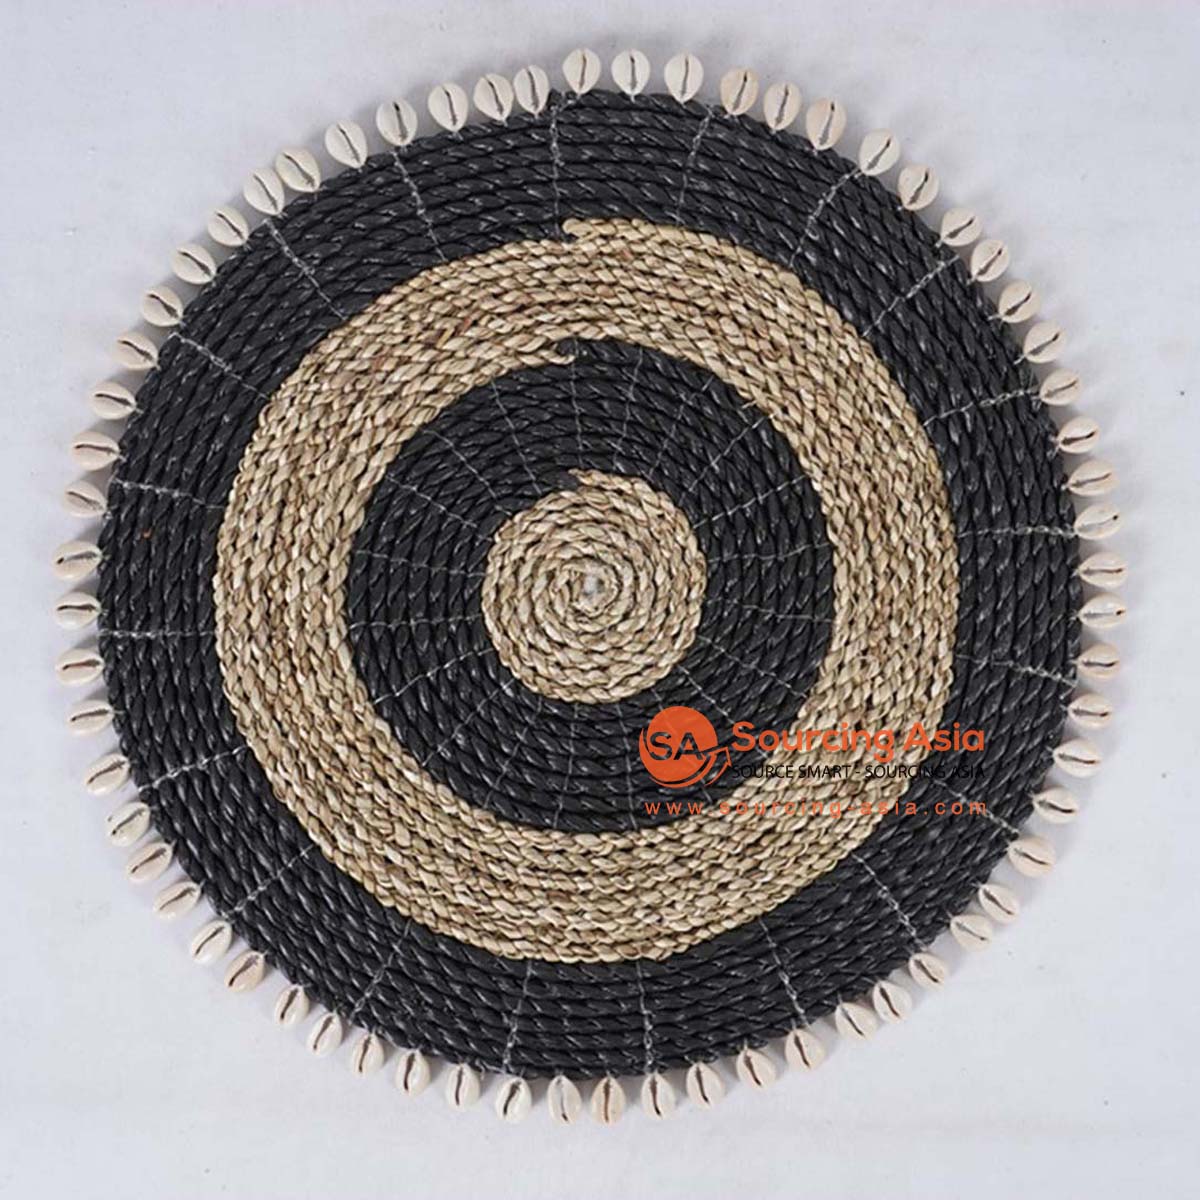 HBSC565 NATURAL AND BLACK PANDANUS ROUND PLACEMAT WITH SHELL EDGE